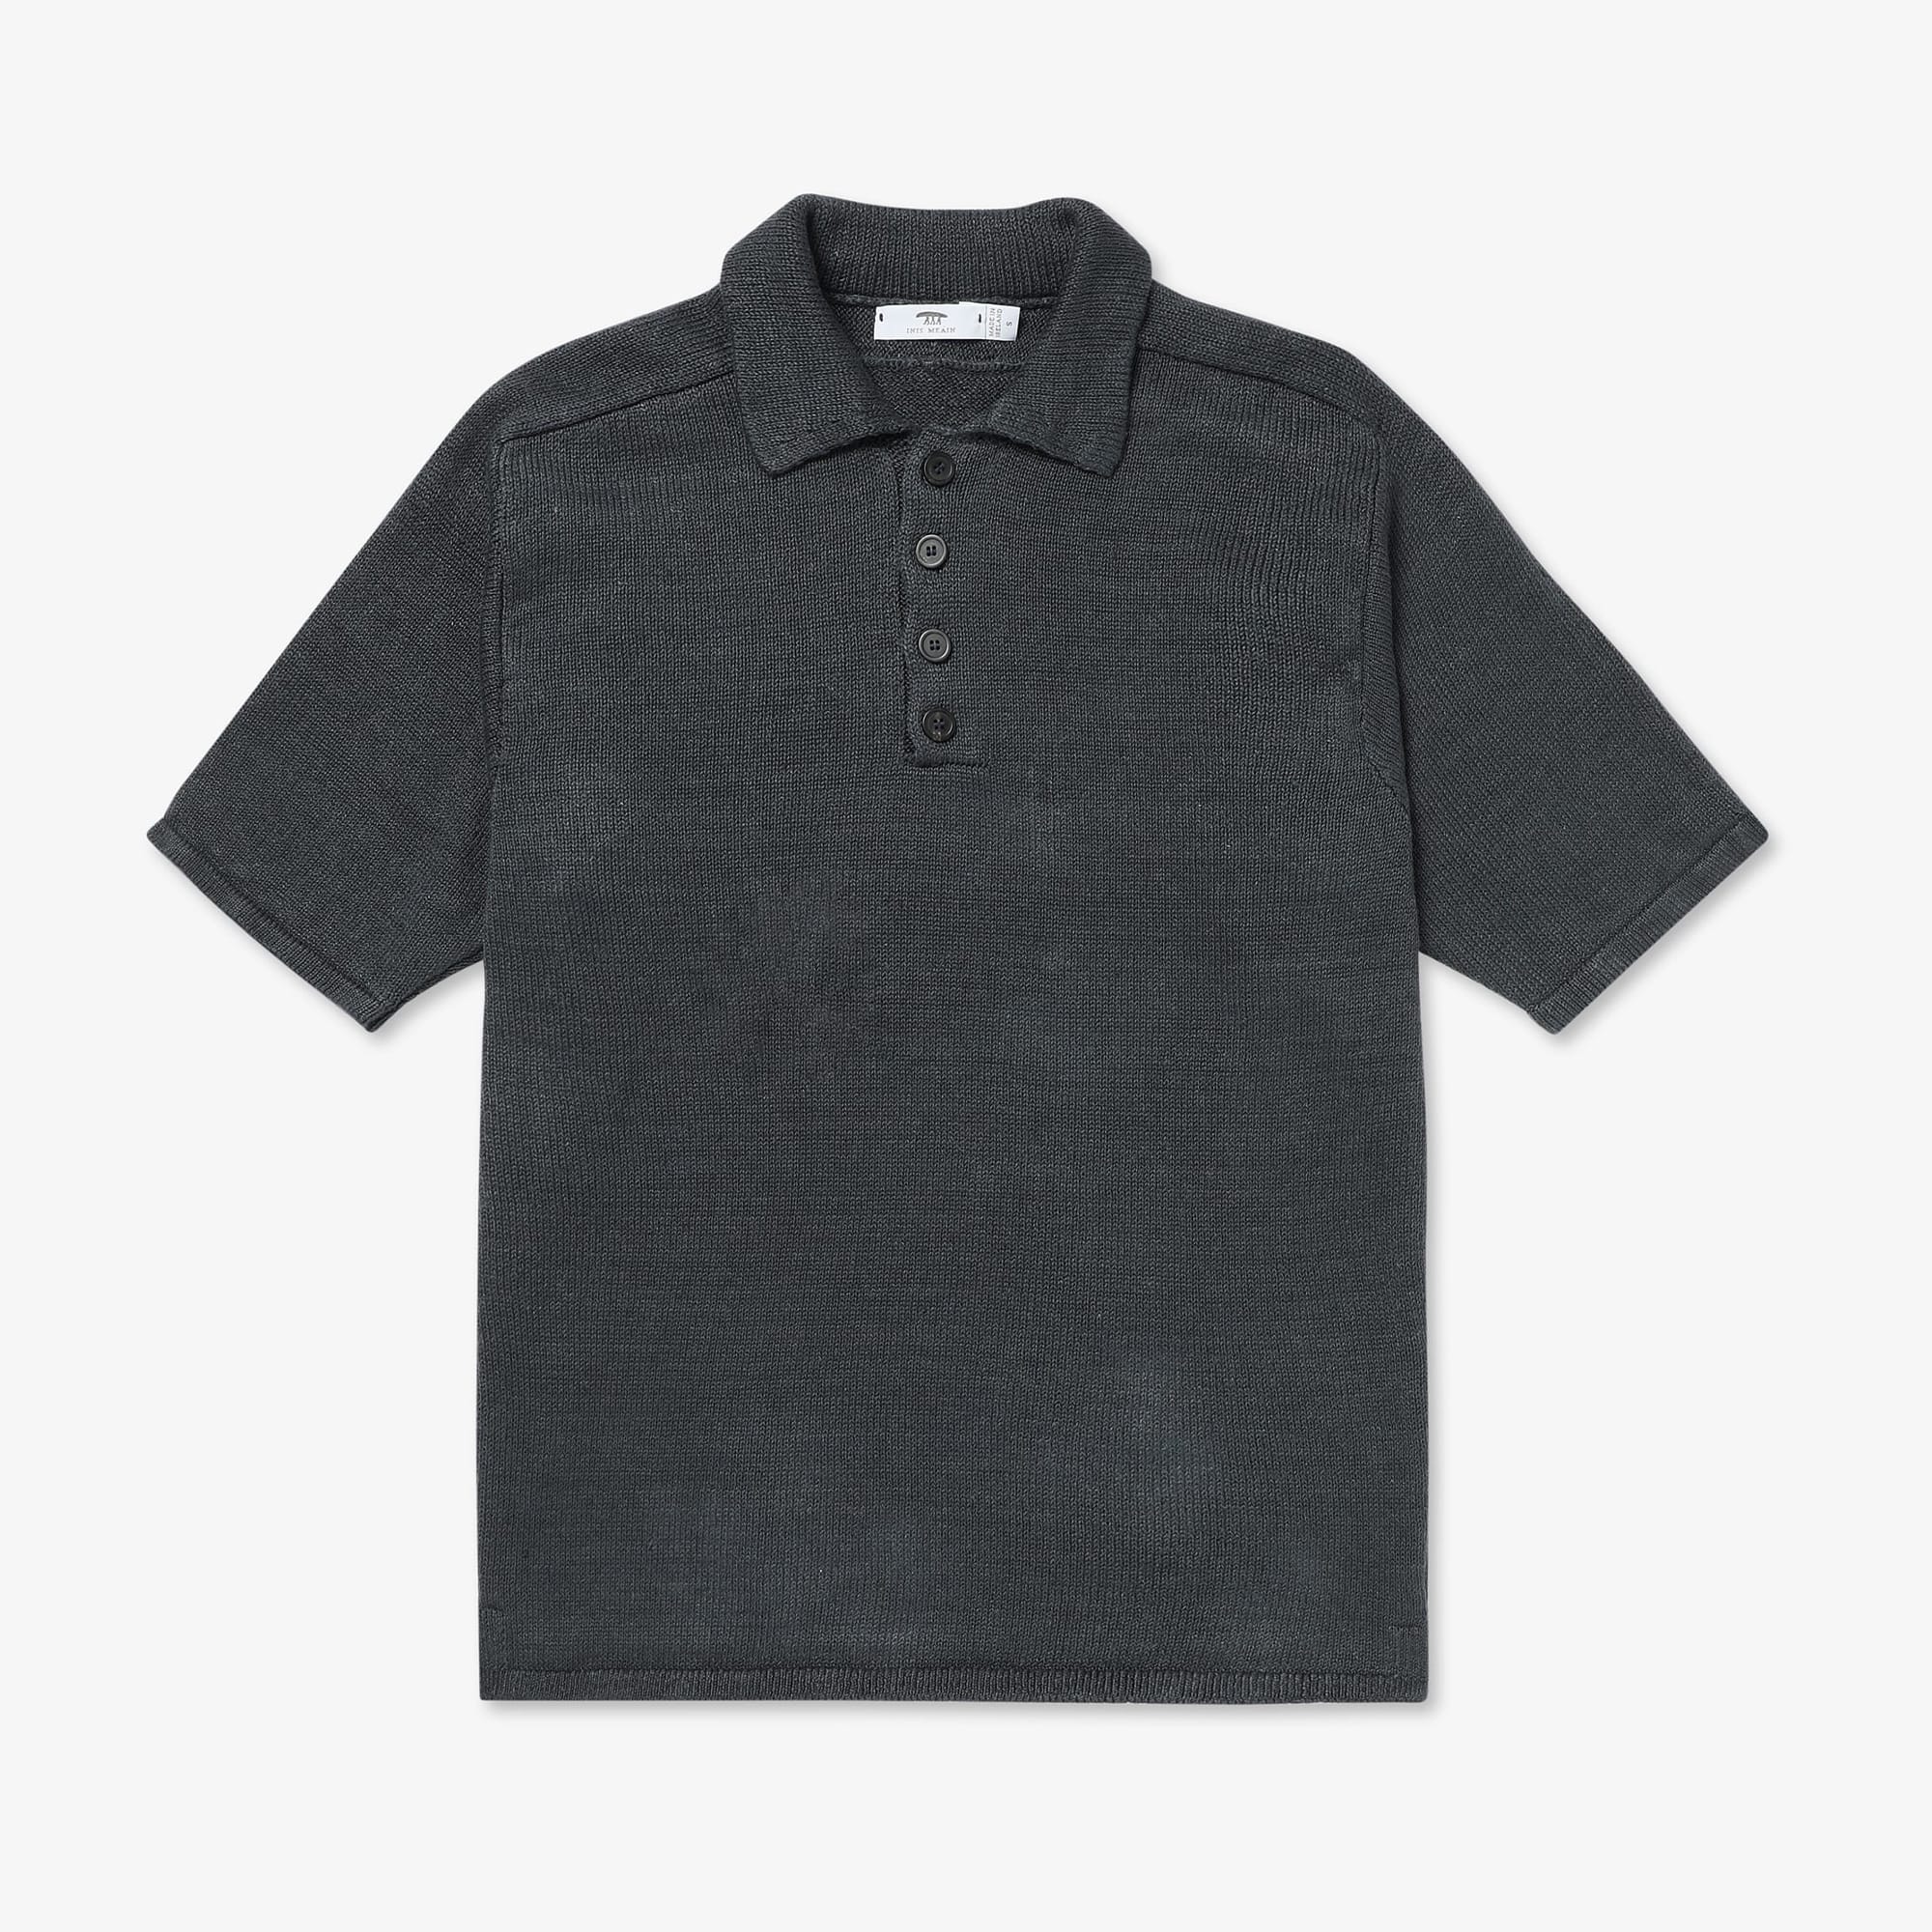 Buttoned Polo in Charcoal — Inis Meáin Knitwear